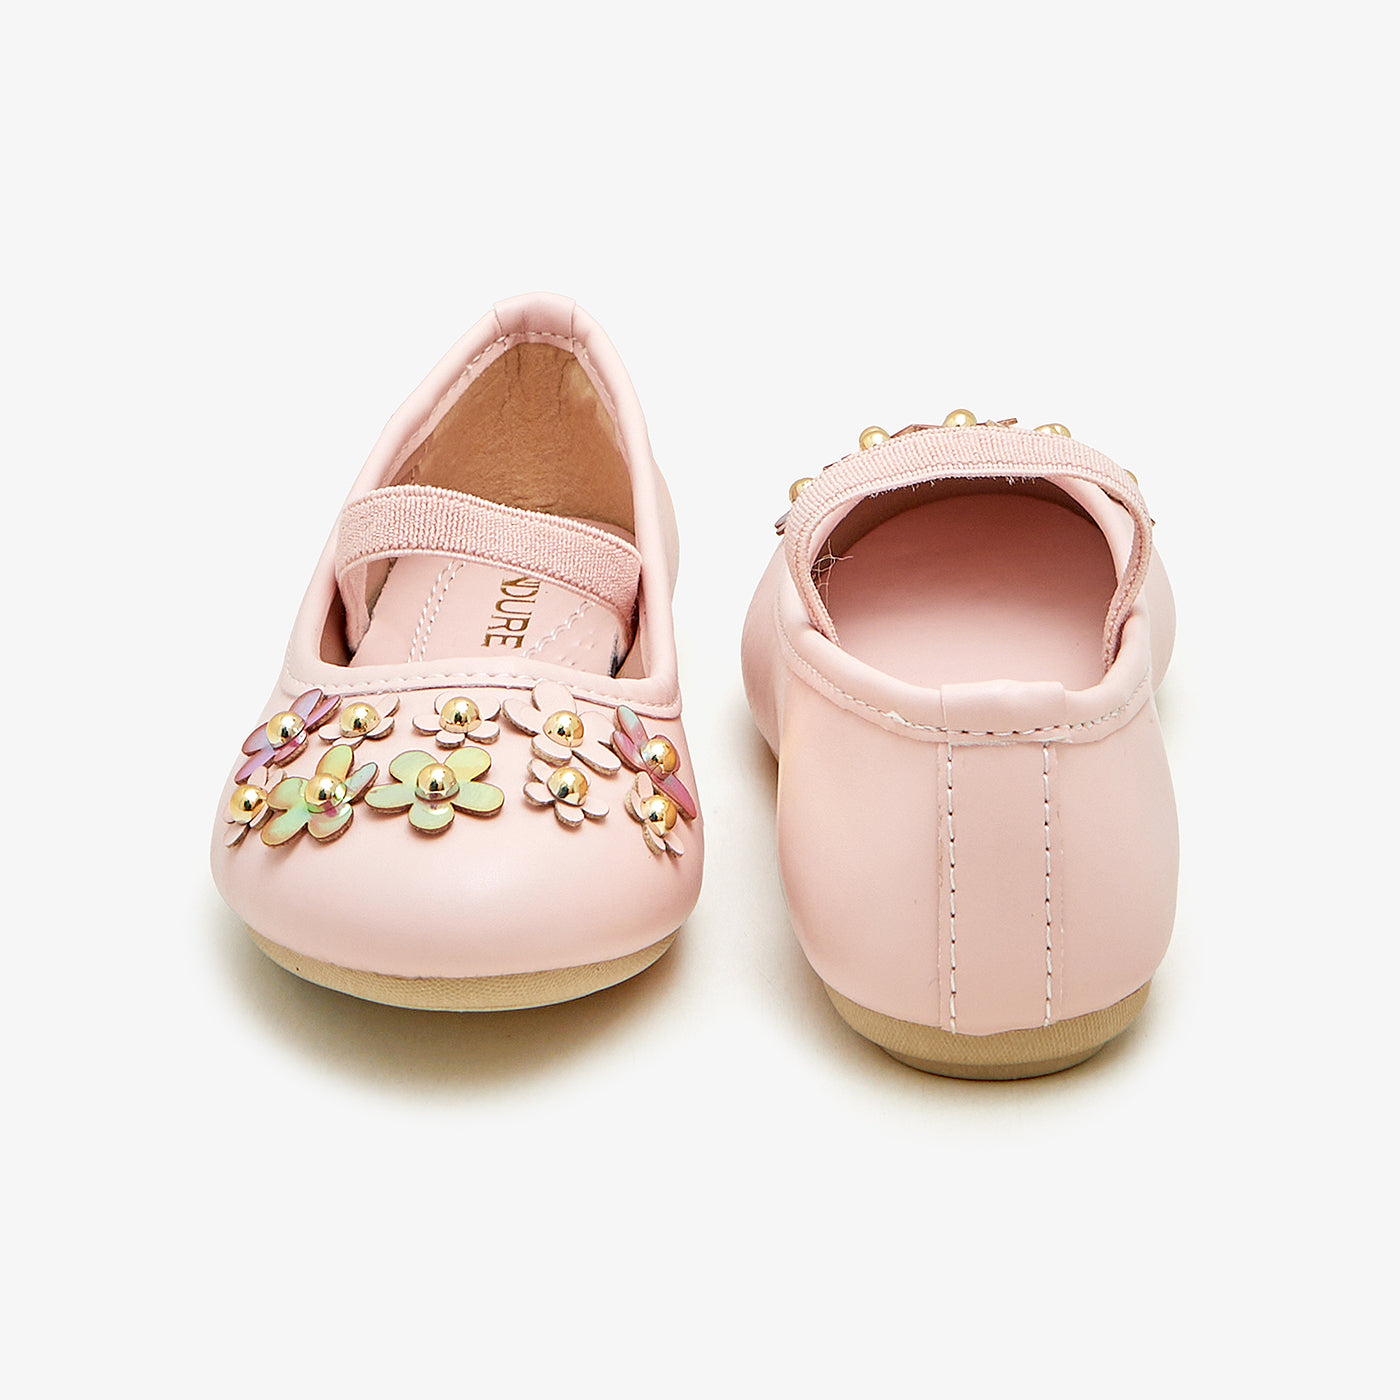 Girls Pumps with Floral Motif